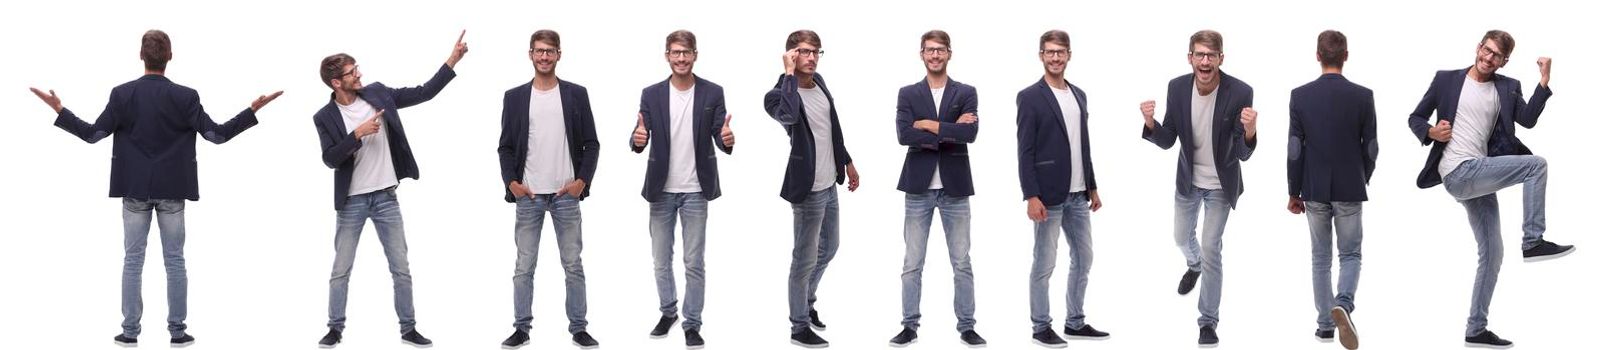 collage of various photos of a successful modern man. isolated on white background.